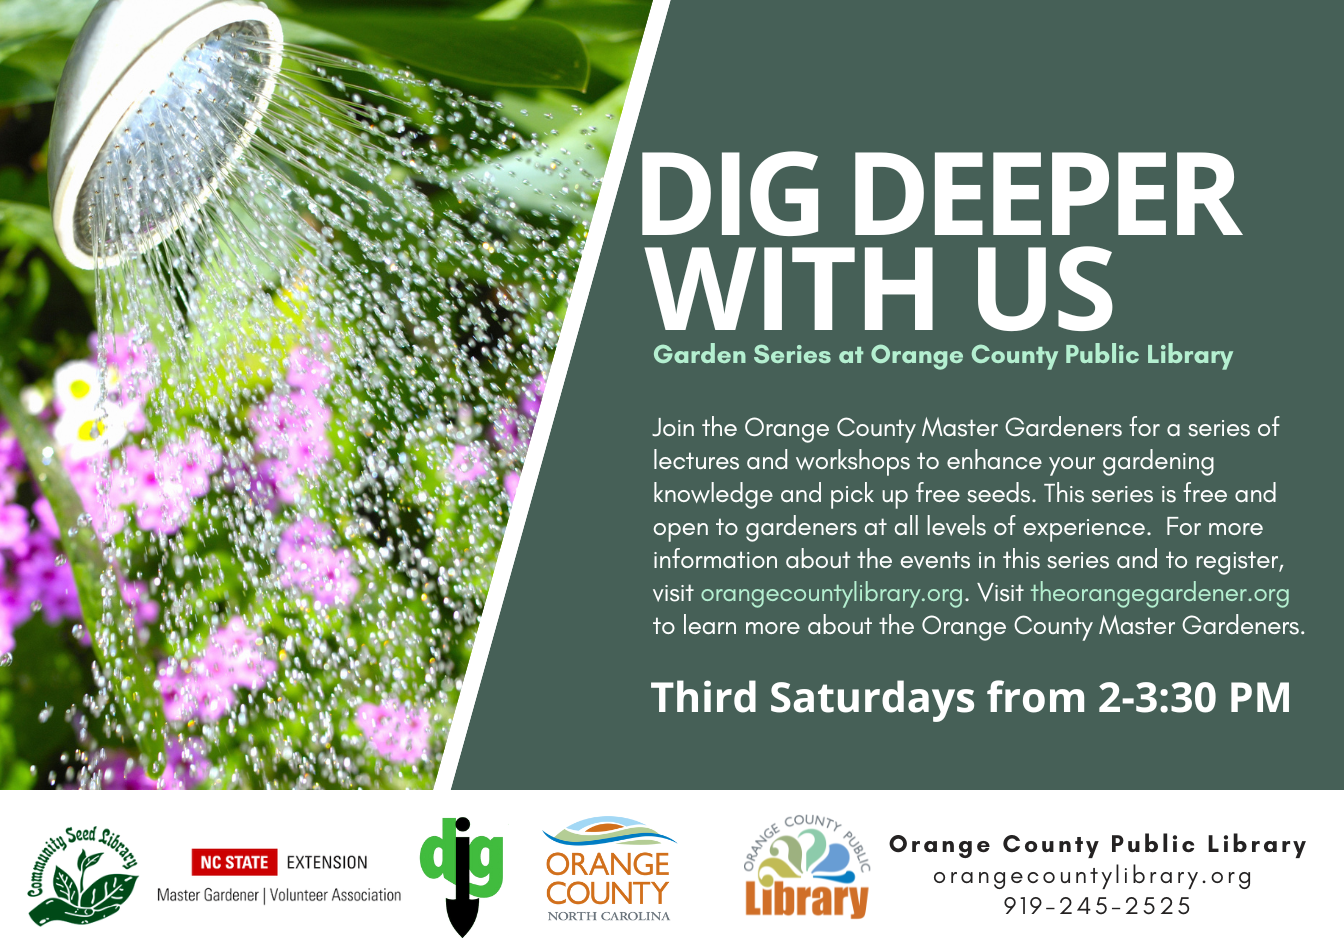 Dig Deeper With Us Garden Series at Orange County Public Library : Join the Orange County Master Gardeners for a series of gardening lectures and workshops and pick up free seeds. Occurring on select third Saturdays of the month from 2pm-3:30pm, this series is free and open to gardeners at all levels of experience. Registration is preferred. Visit theorangegardener.org to learn more about the Orange County Master Gardeners.